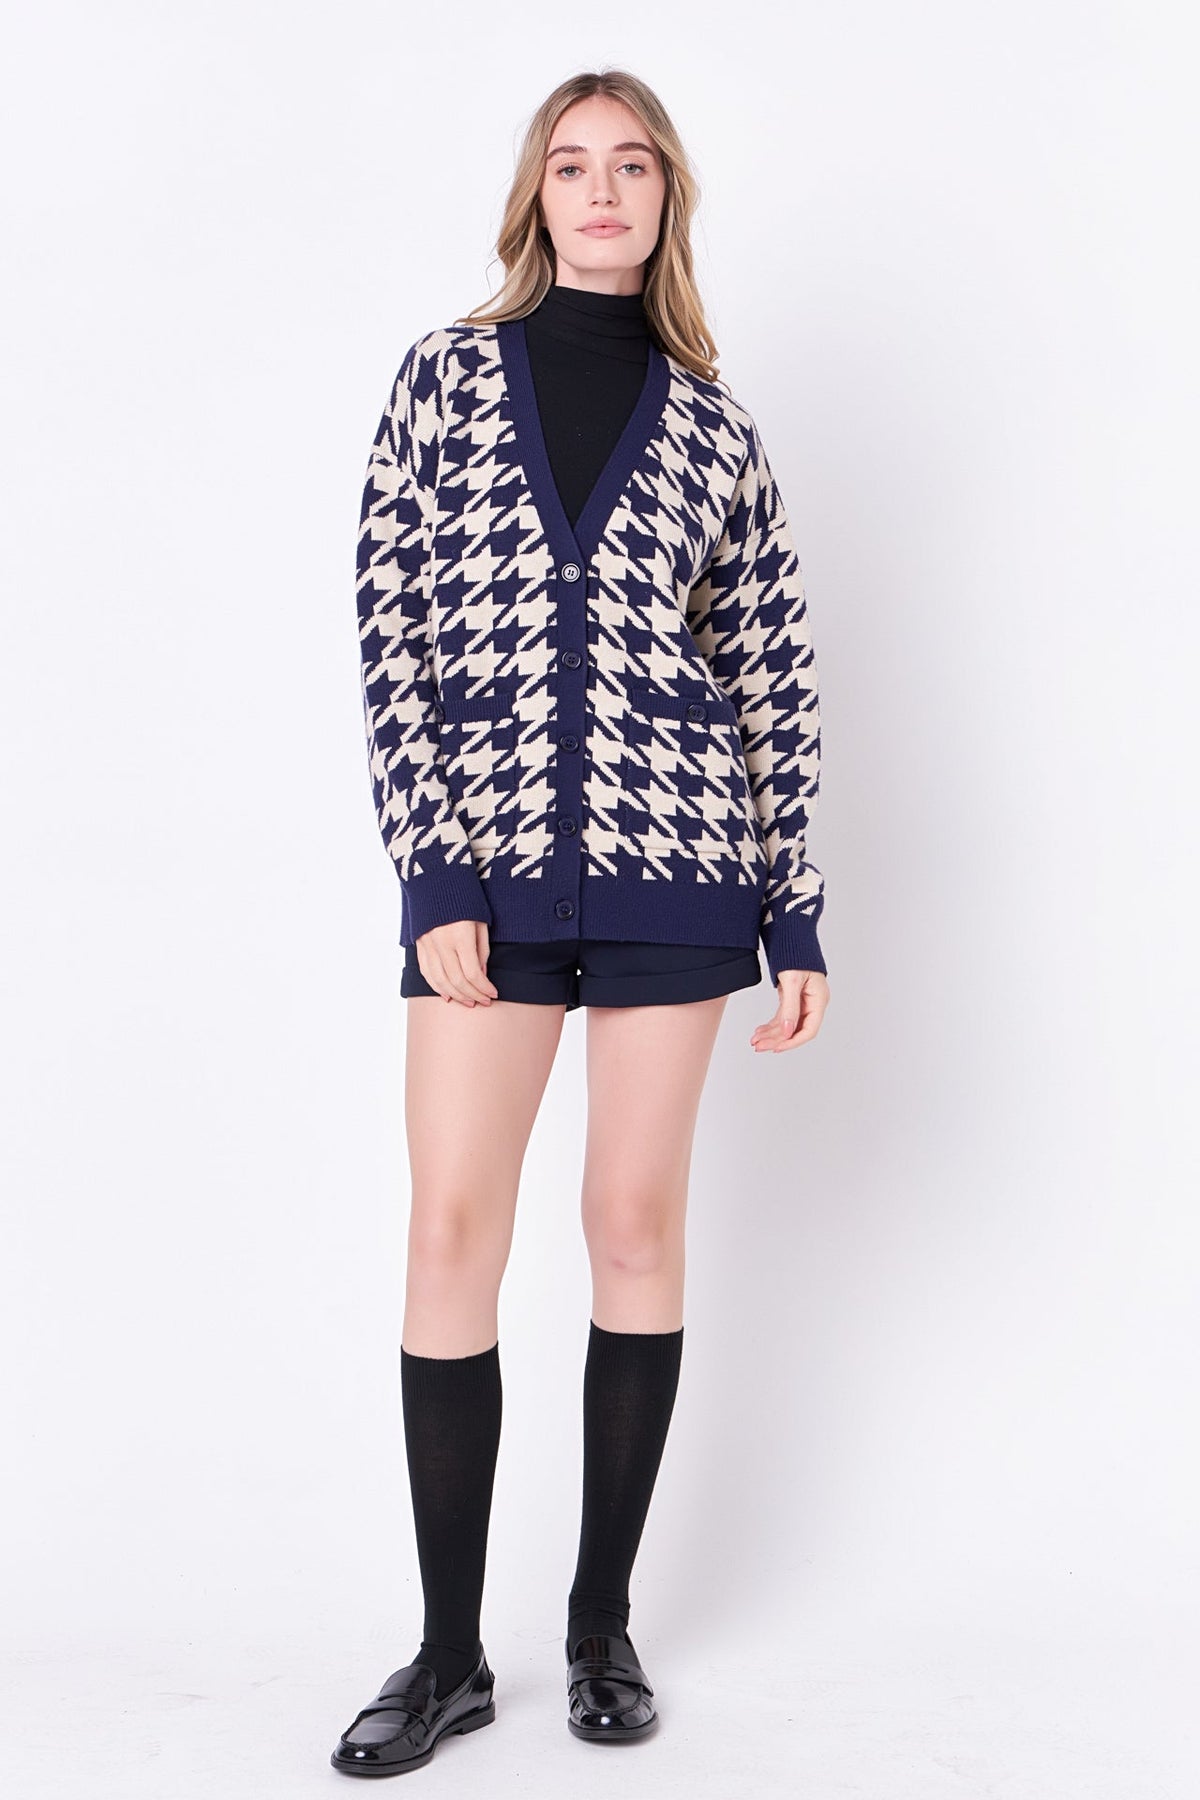 ENGLISH FACTORY - Knit Houndstooth Cardigan - SWEATERS & KNITS available at Objectrare